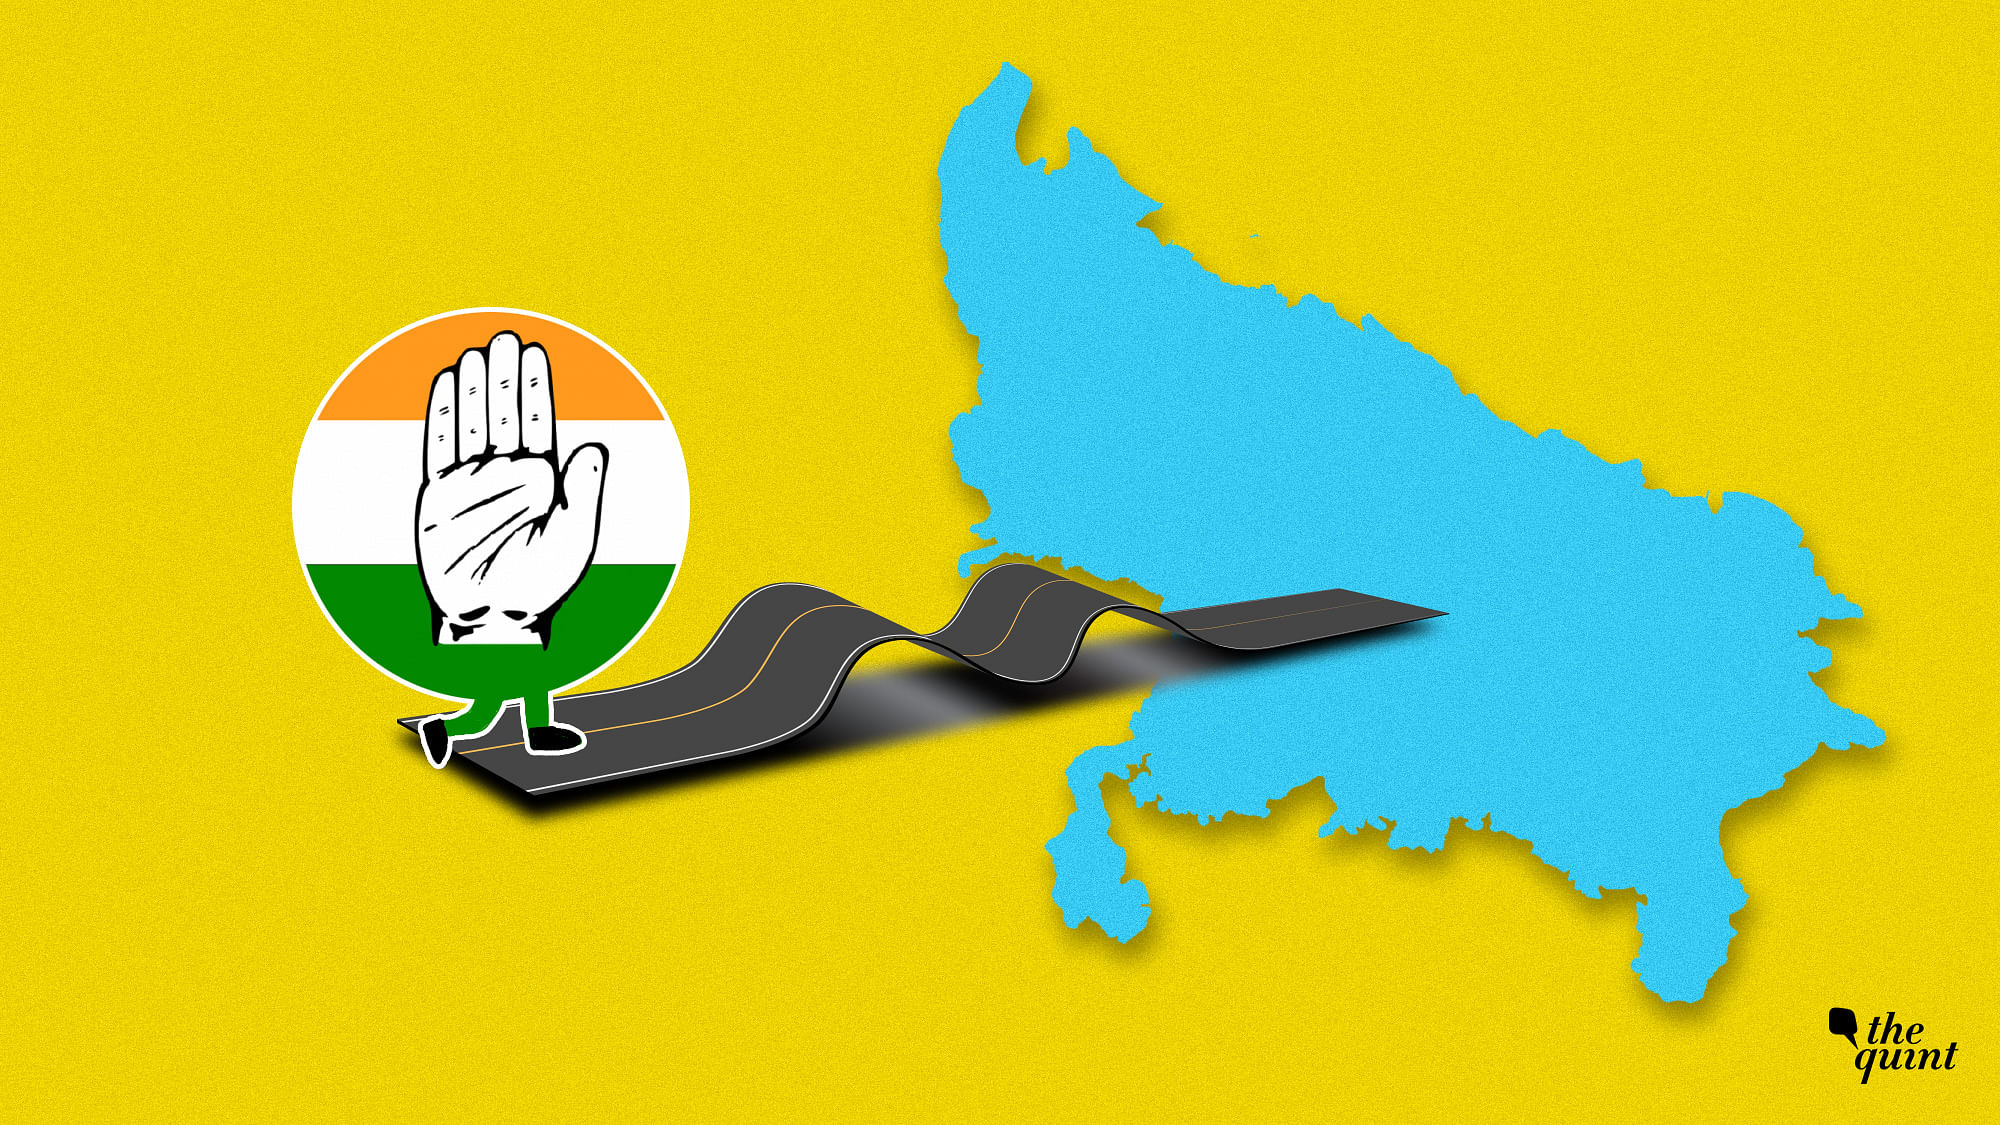 Image of UP map and Congress symbol used for representational purposes.